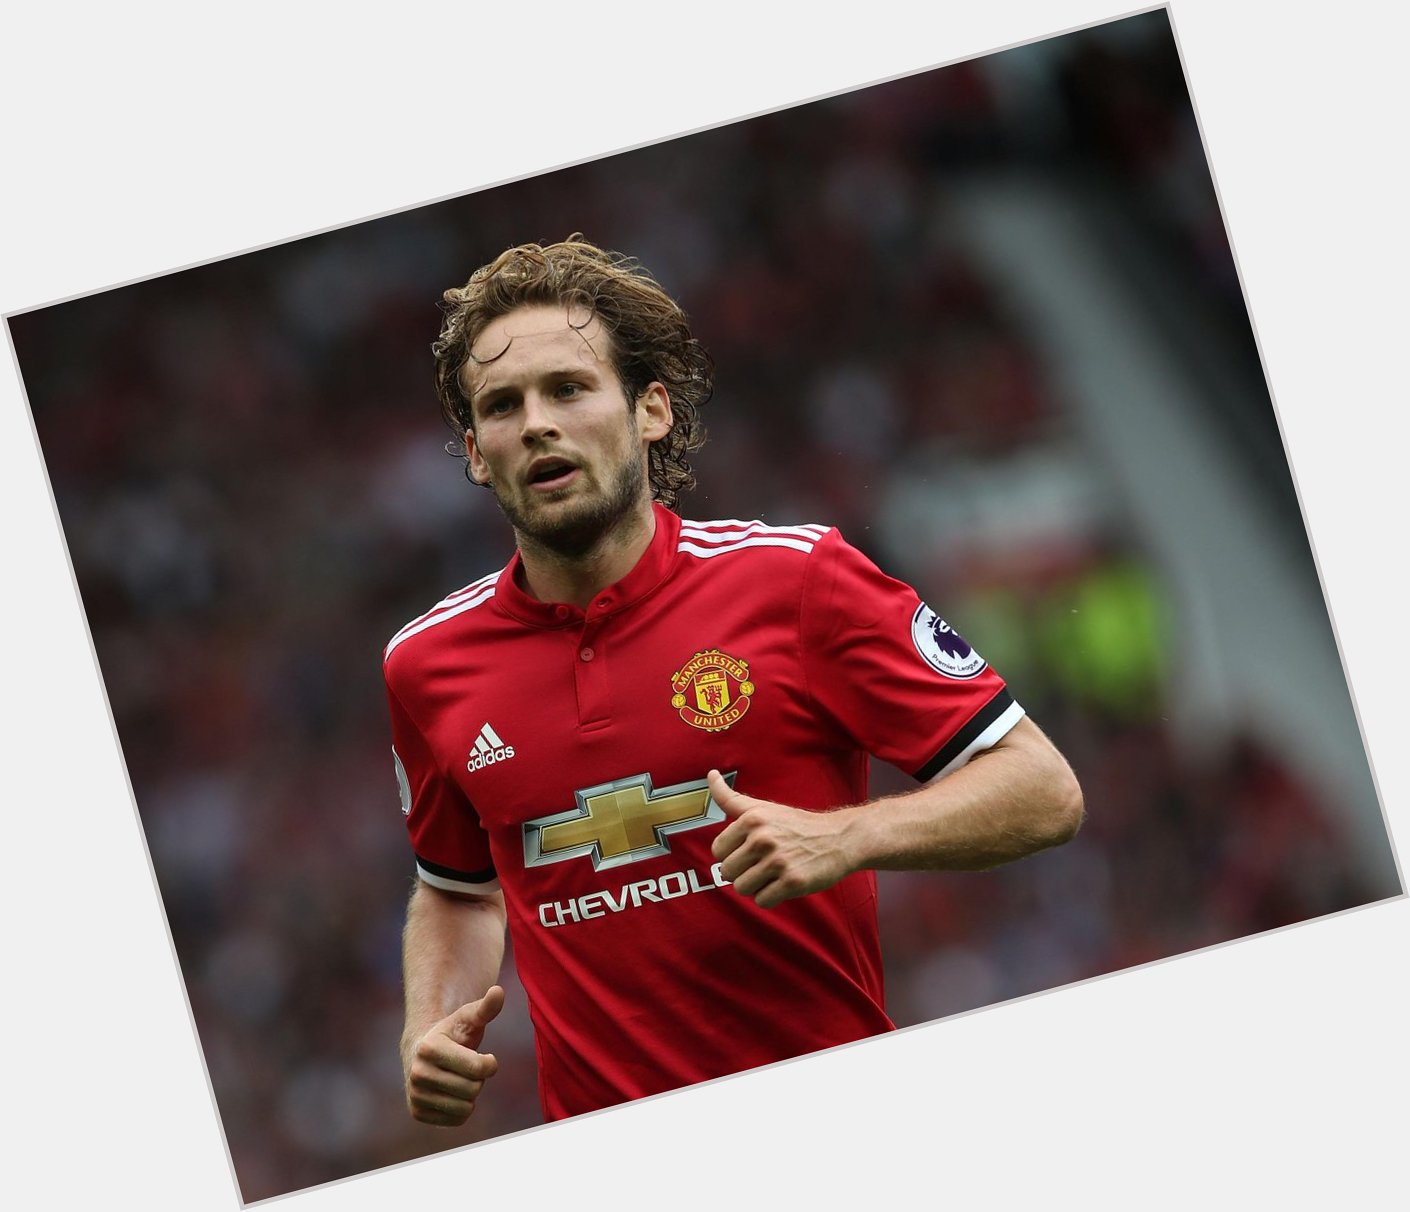 Happy 32nd birthday to former player Daley Blind, who was born 9/3/90 in Amsterdam, Netherlands     